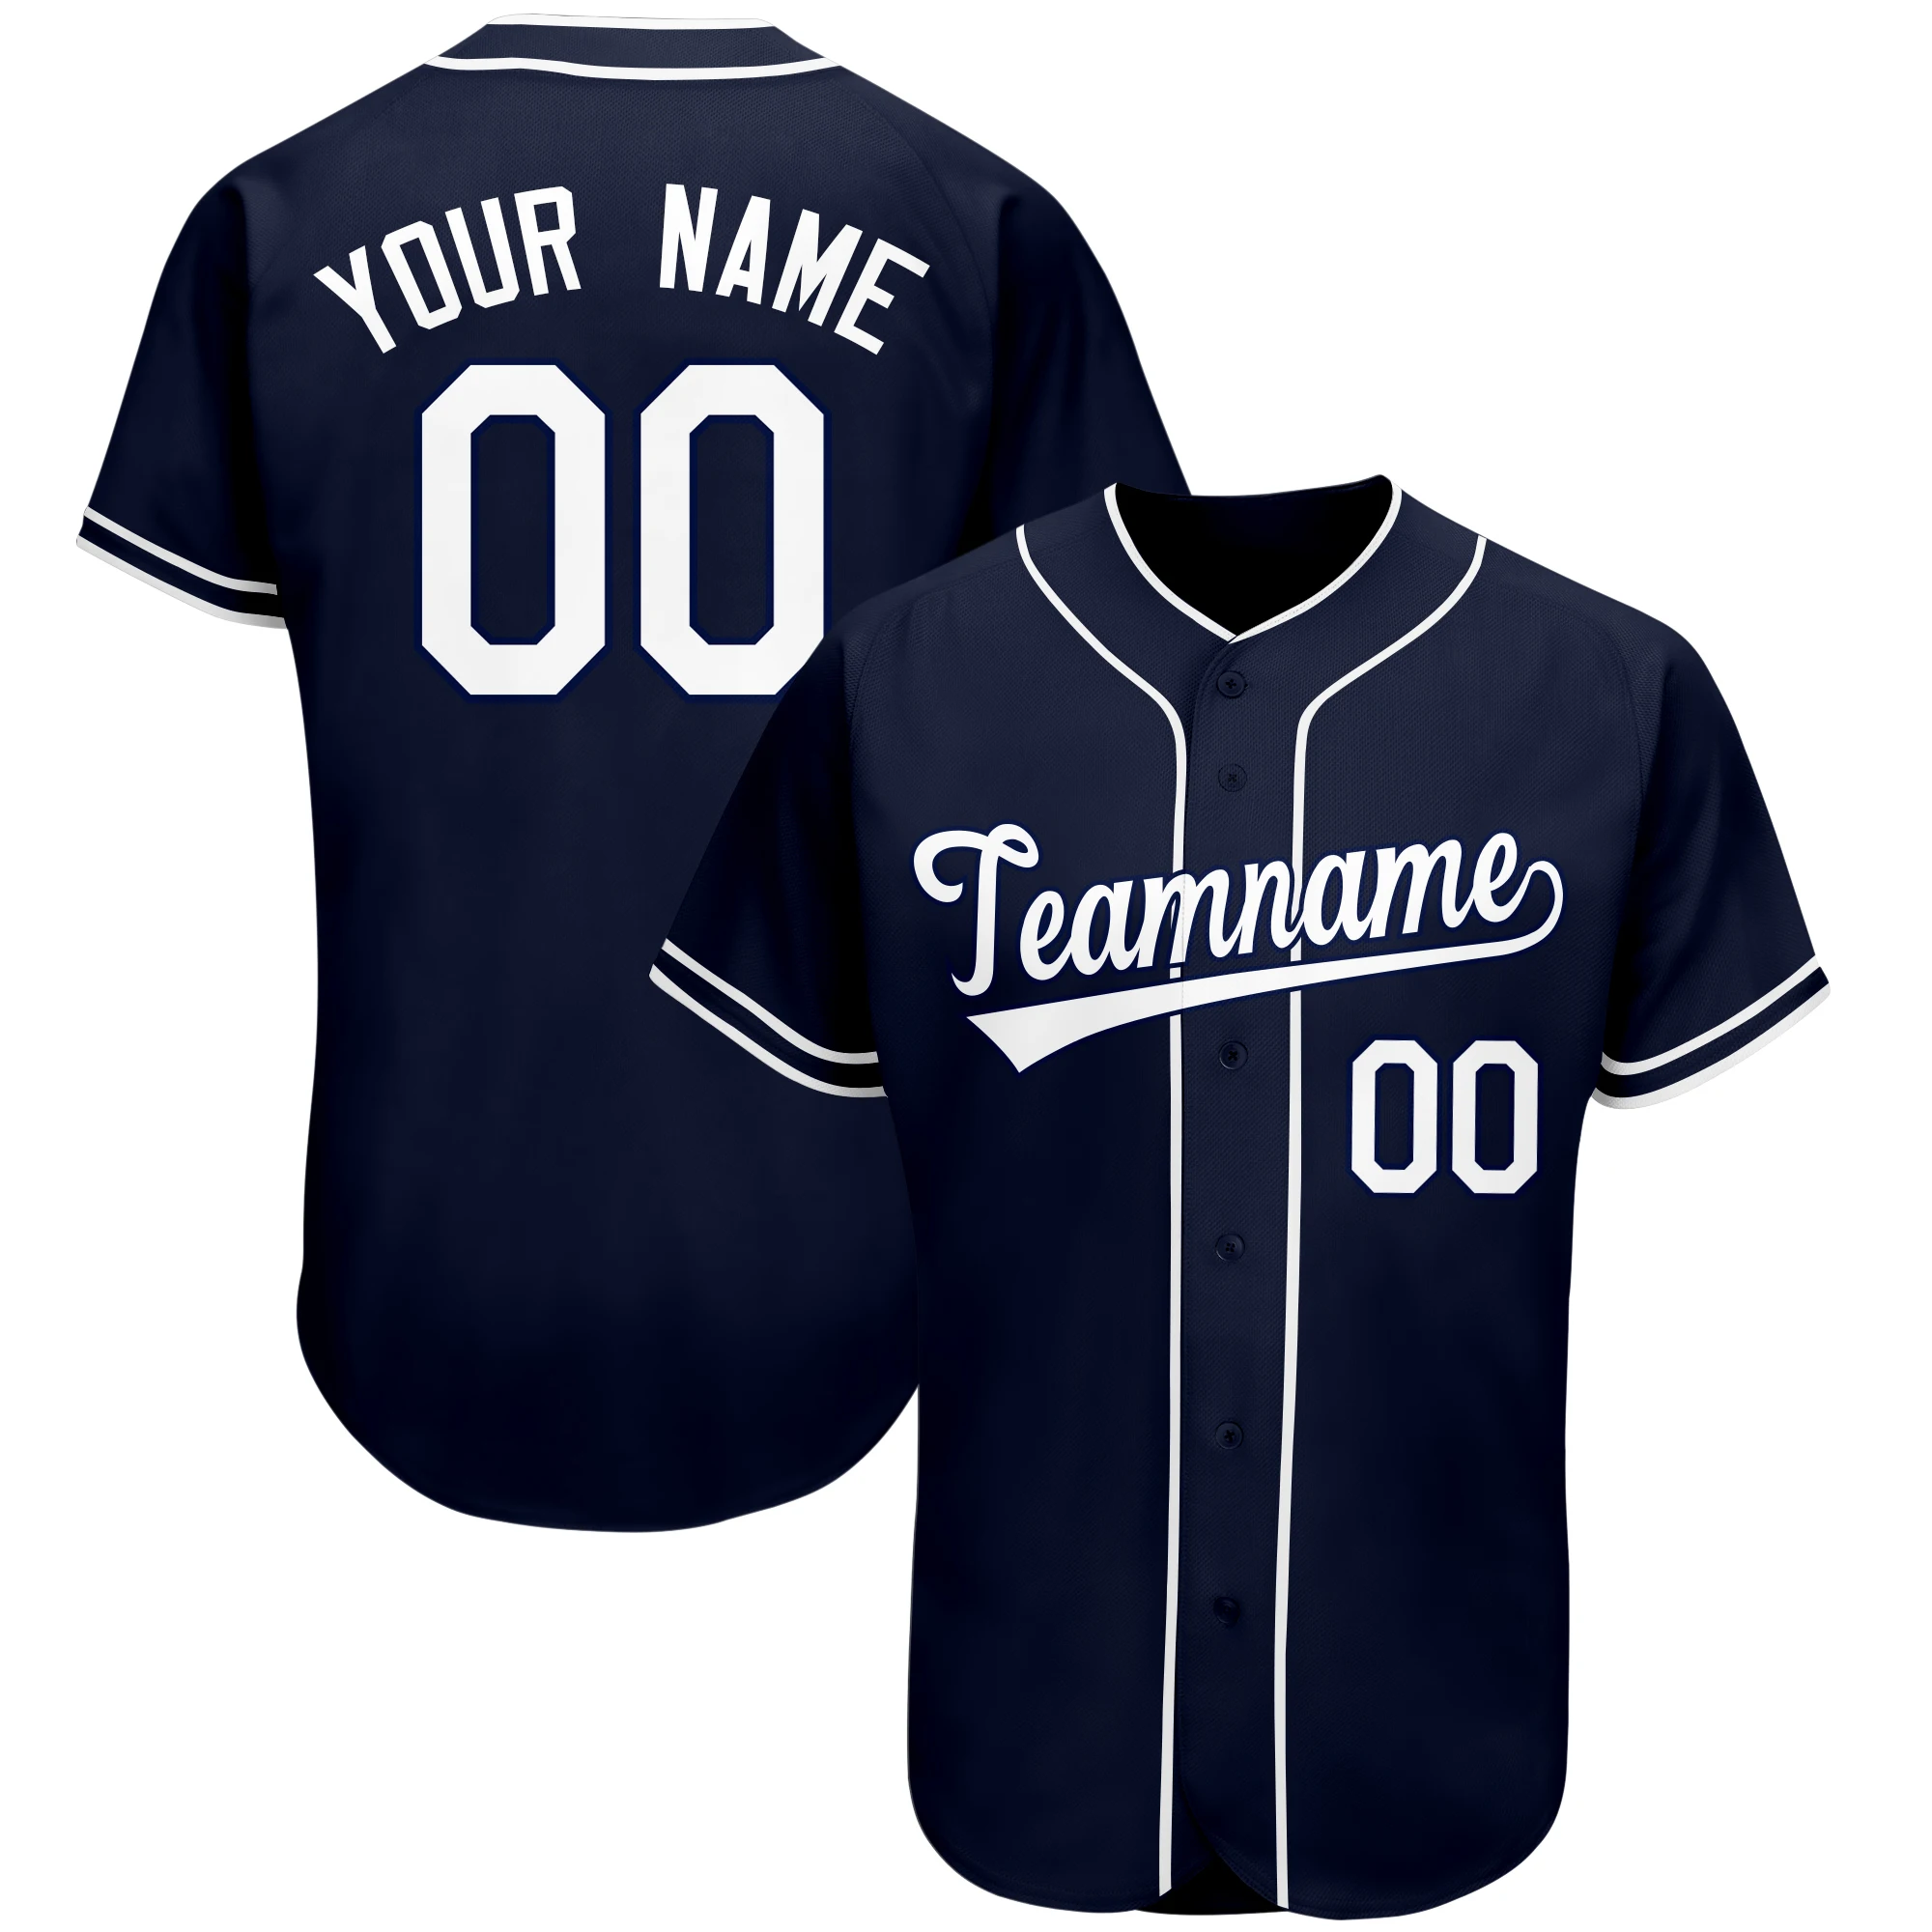 

Customize Baseball Jersey Sew Your Name/Number Active Soft Training Any Color Softball Uniform for Adults/Kids outdoors Big size